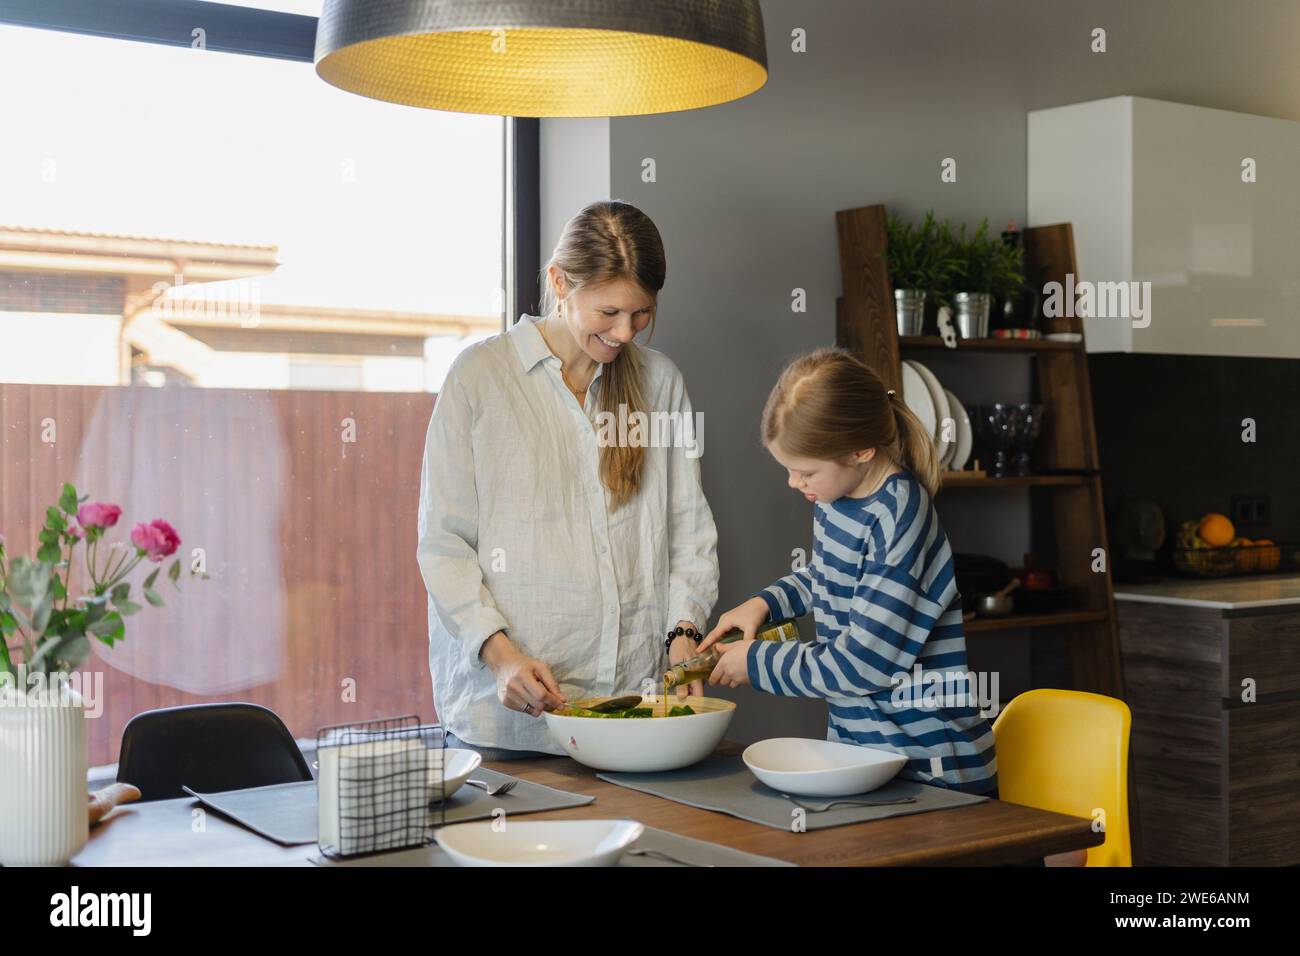 Smiling mother and daughter preparing food at dining table Stock Photo